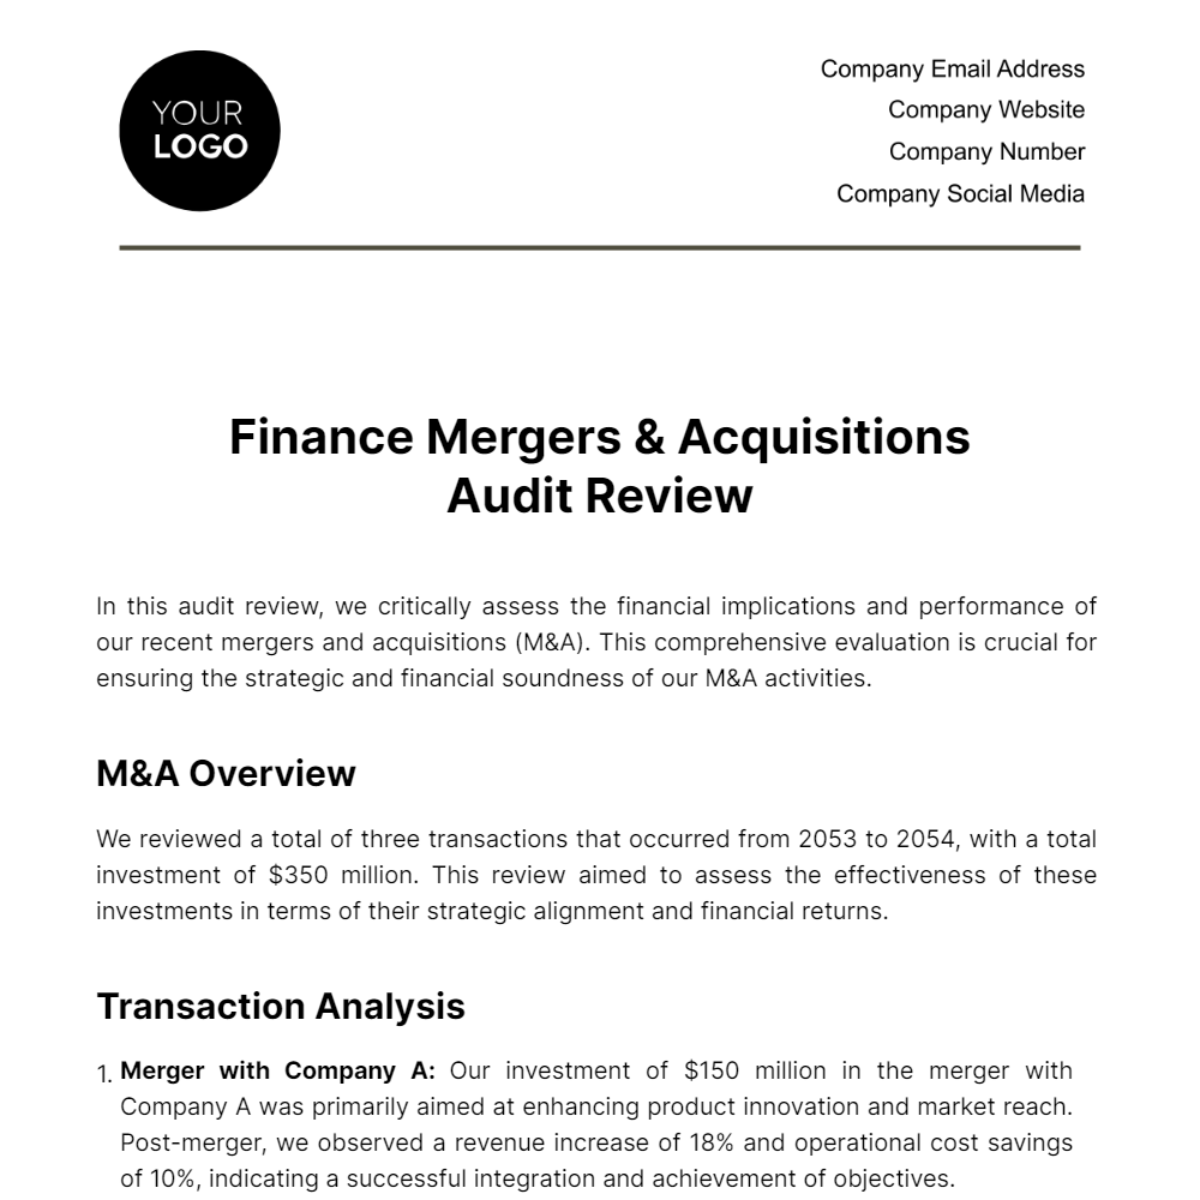 Finance Mergers & Acquisitions Audit Review Template